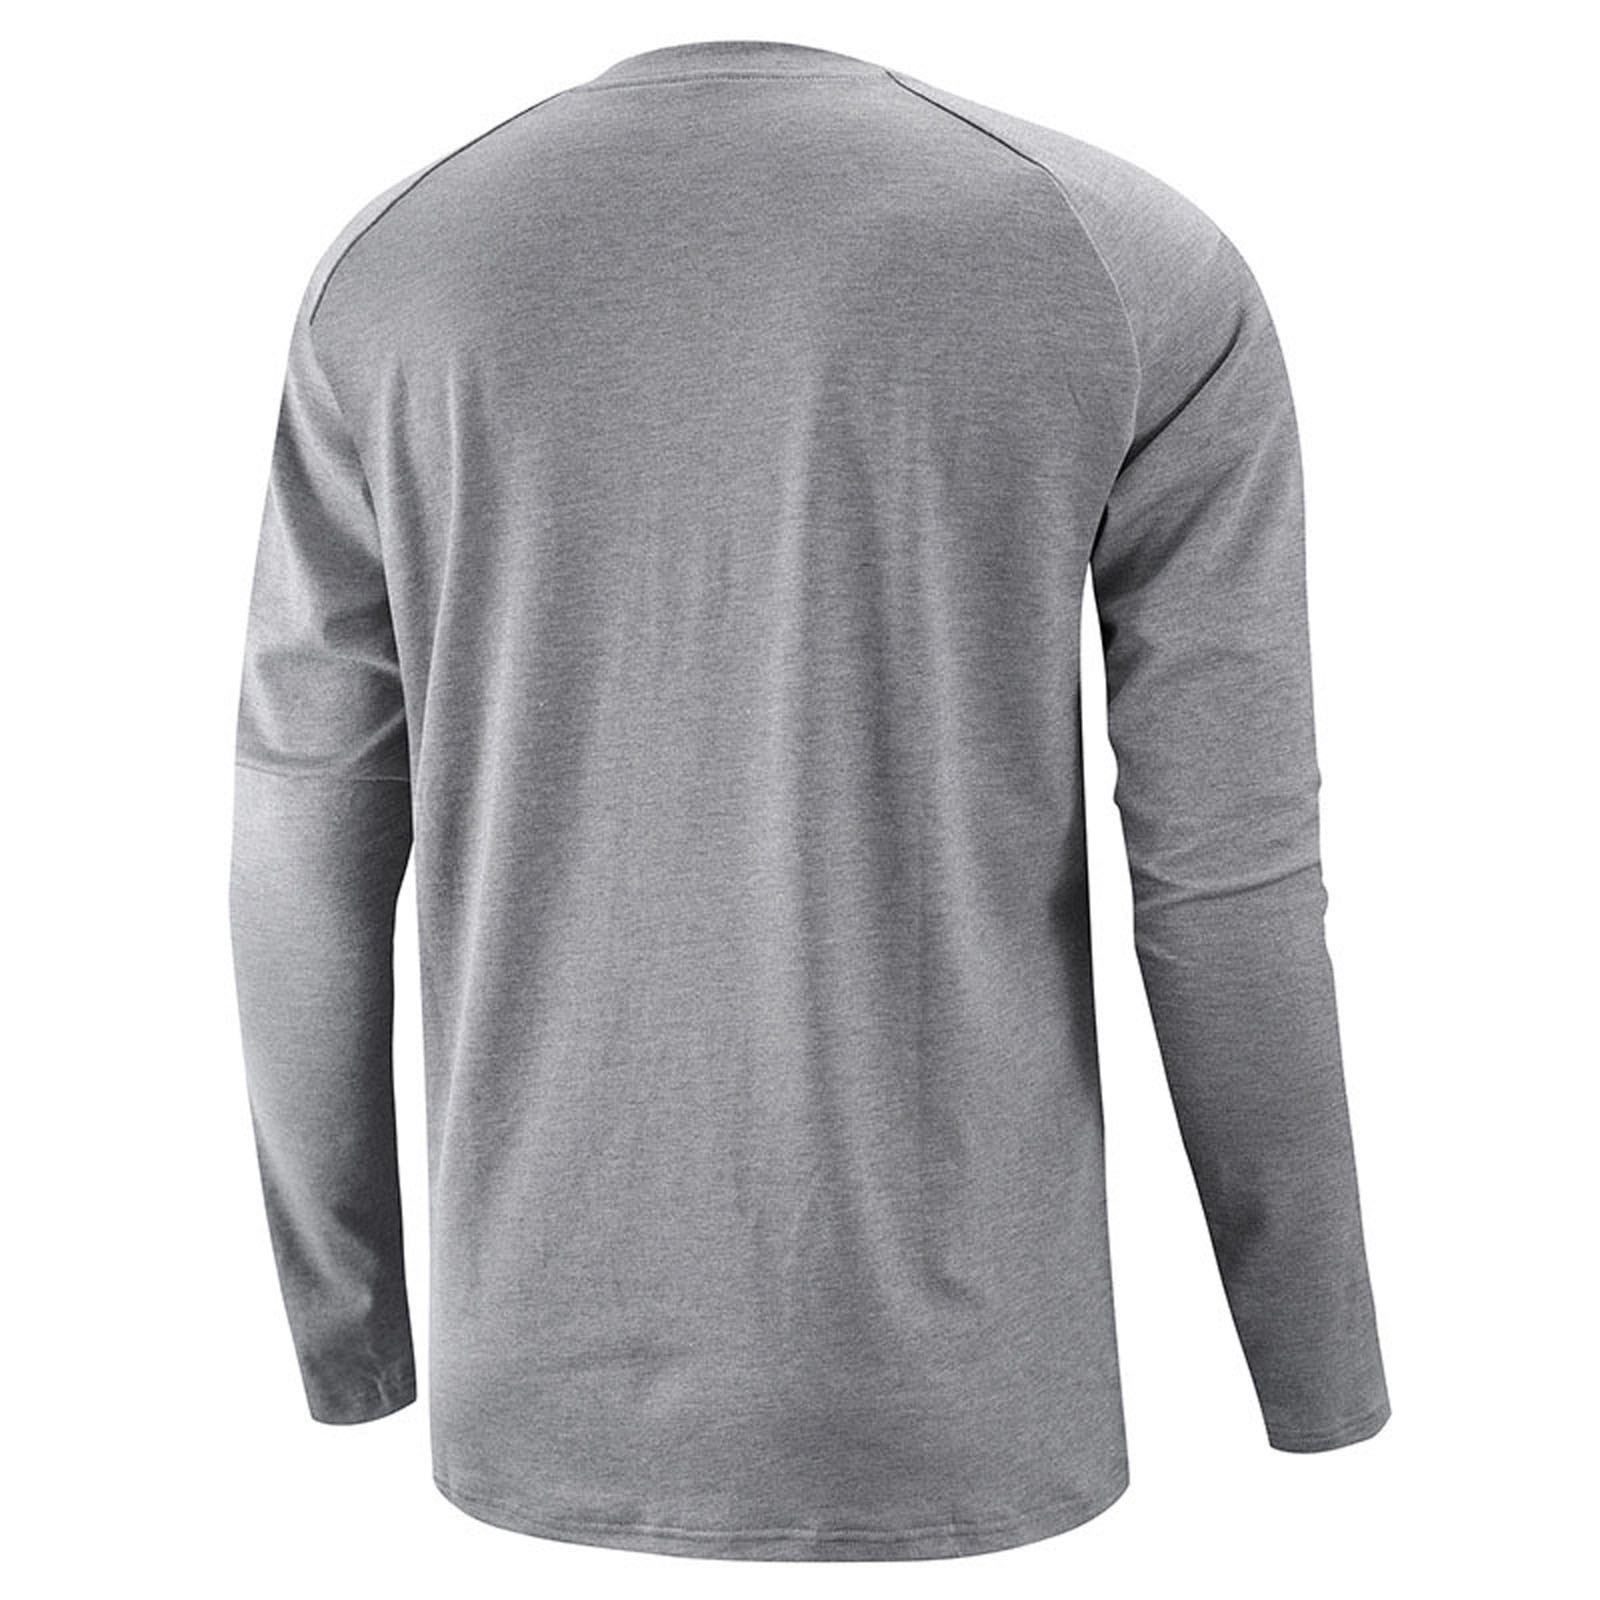 Mens Long Sleeve T-Shirt Oversize Pullover Breathable Silky Raglan top Blouse 